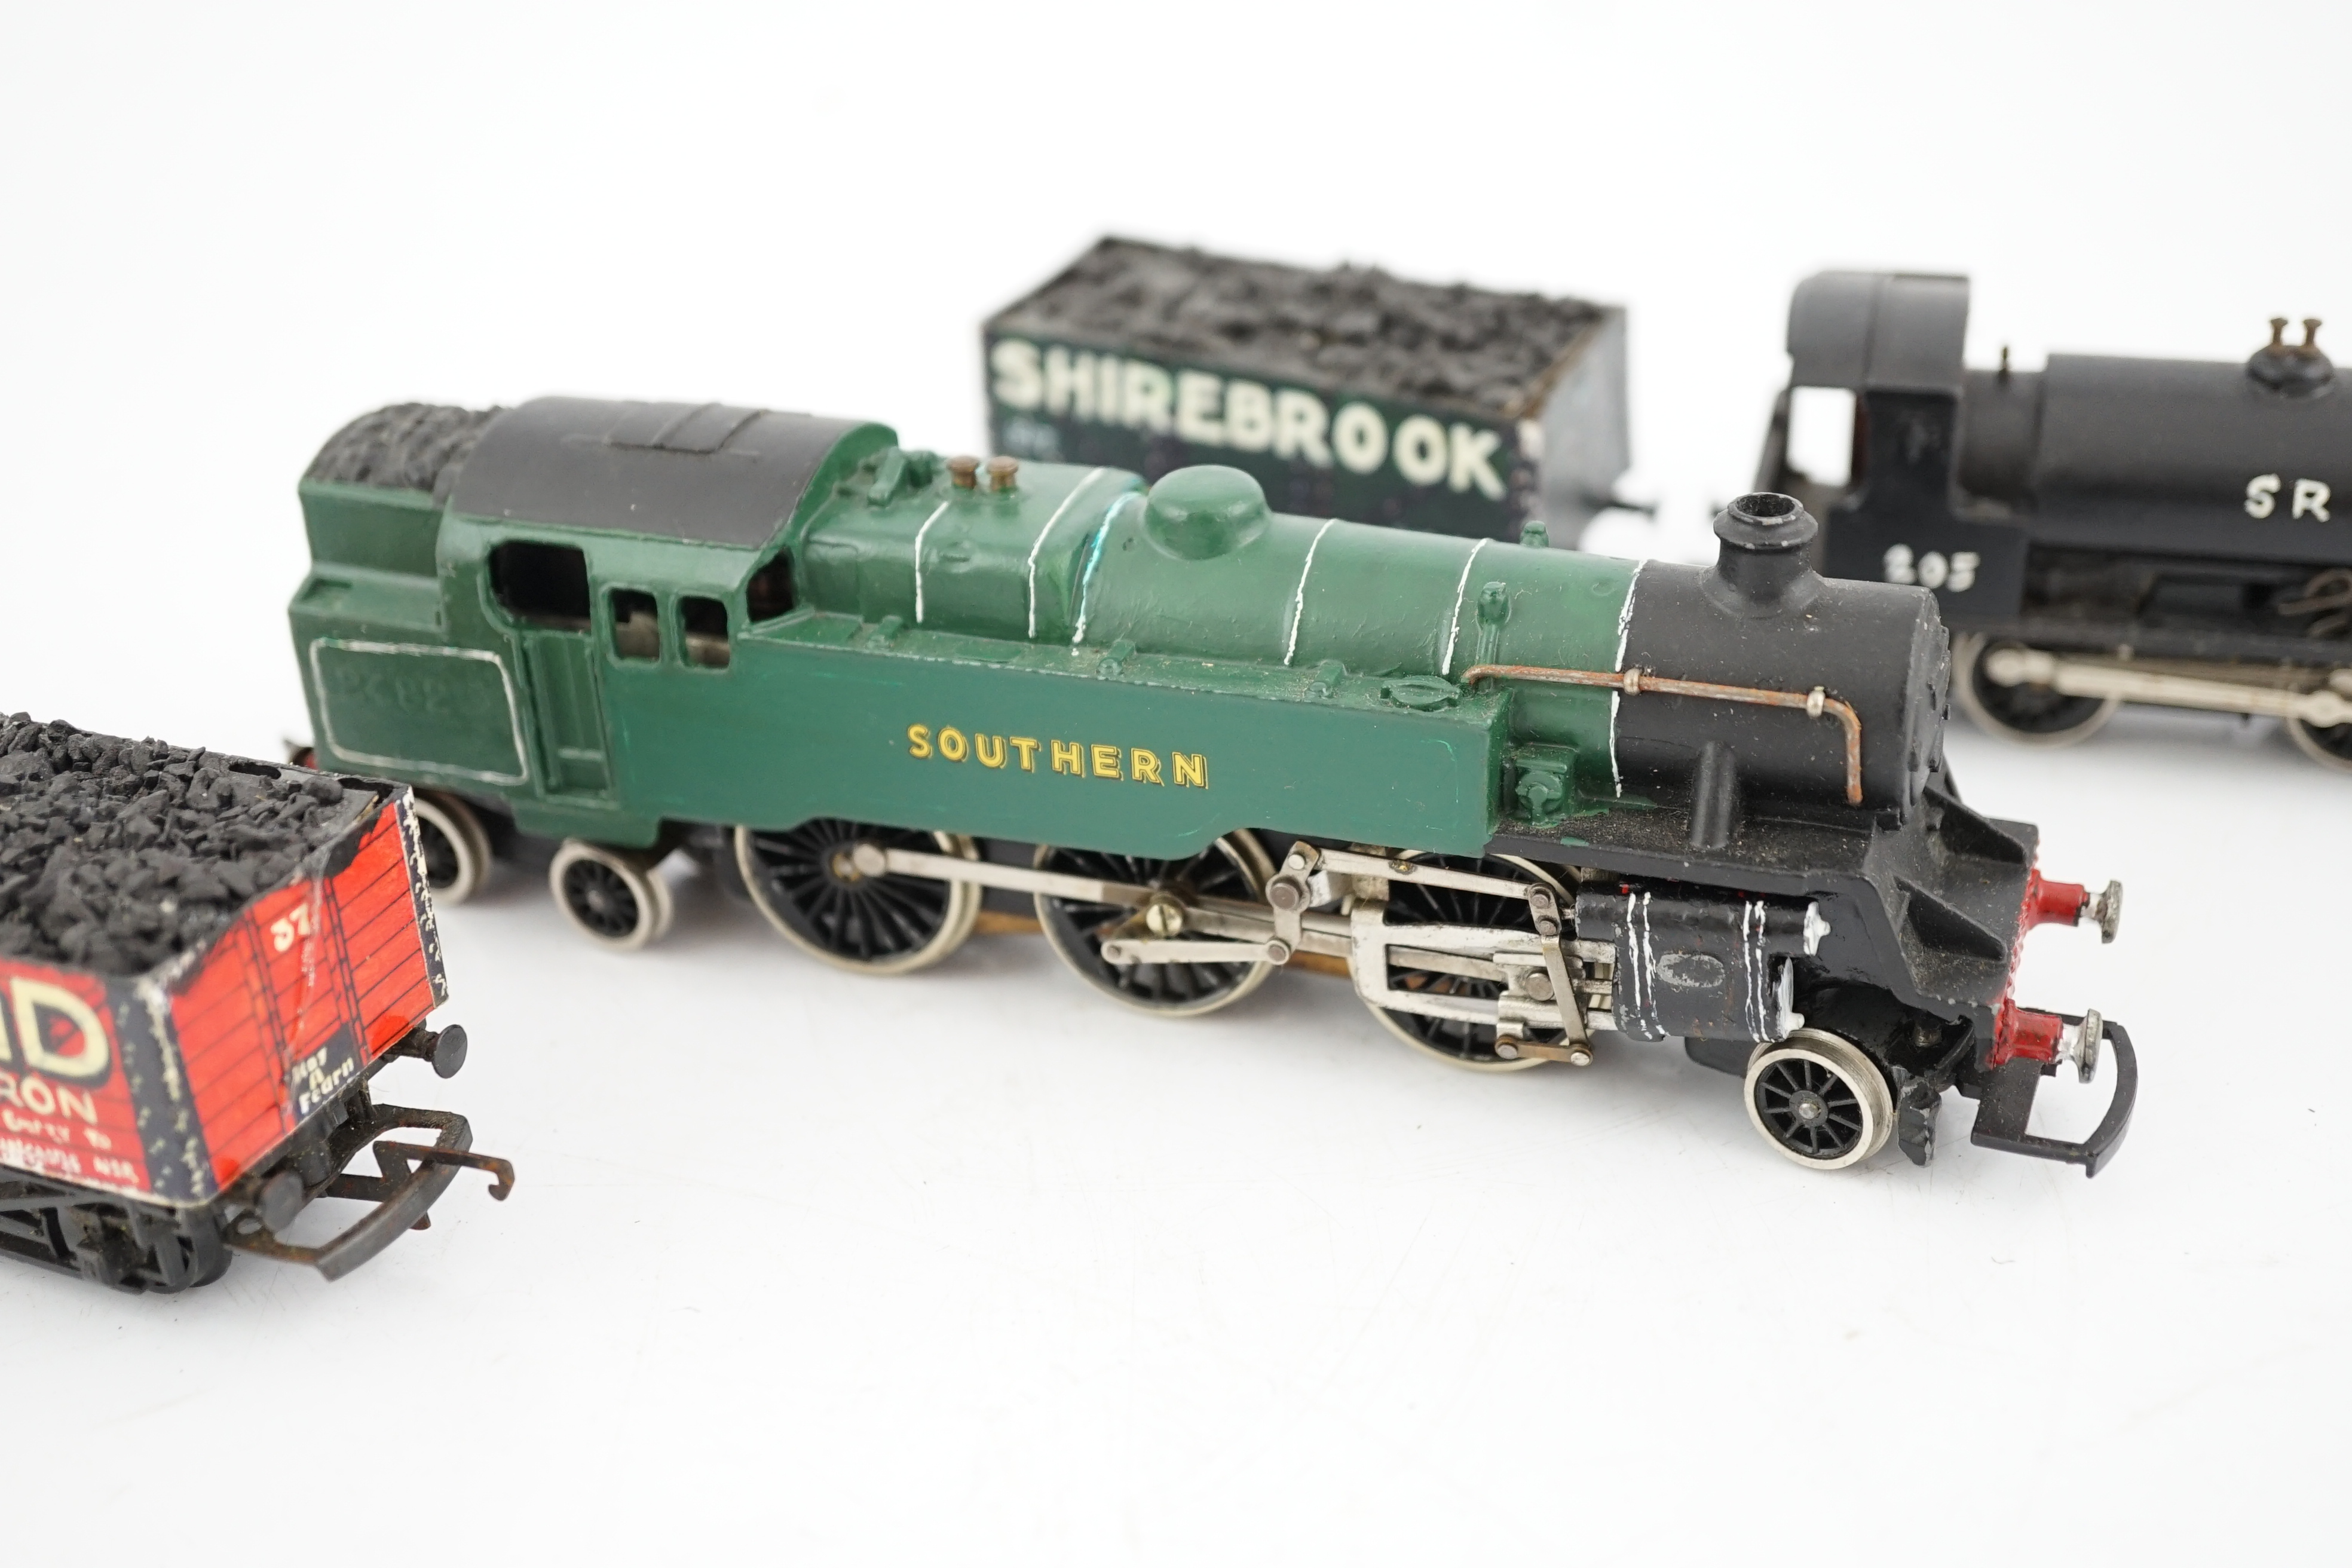 A quantity of 00 gauge railway by Hornby, Tri-ang, Dapol, Crescent, etc. including five locomotives; a Hornby Dublo Southern 2-6-4T, a GWR 0-4-0T, A Southern Terrier, and two 0-4-0ST, together with a number of freight, w